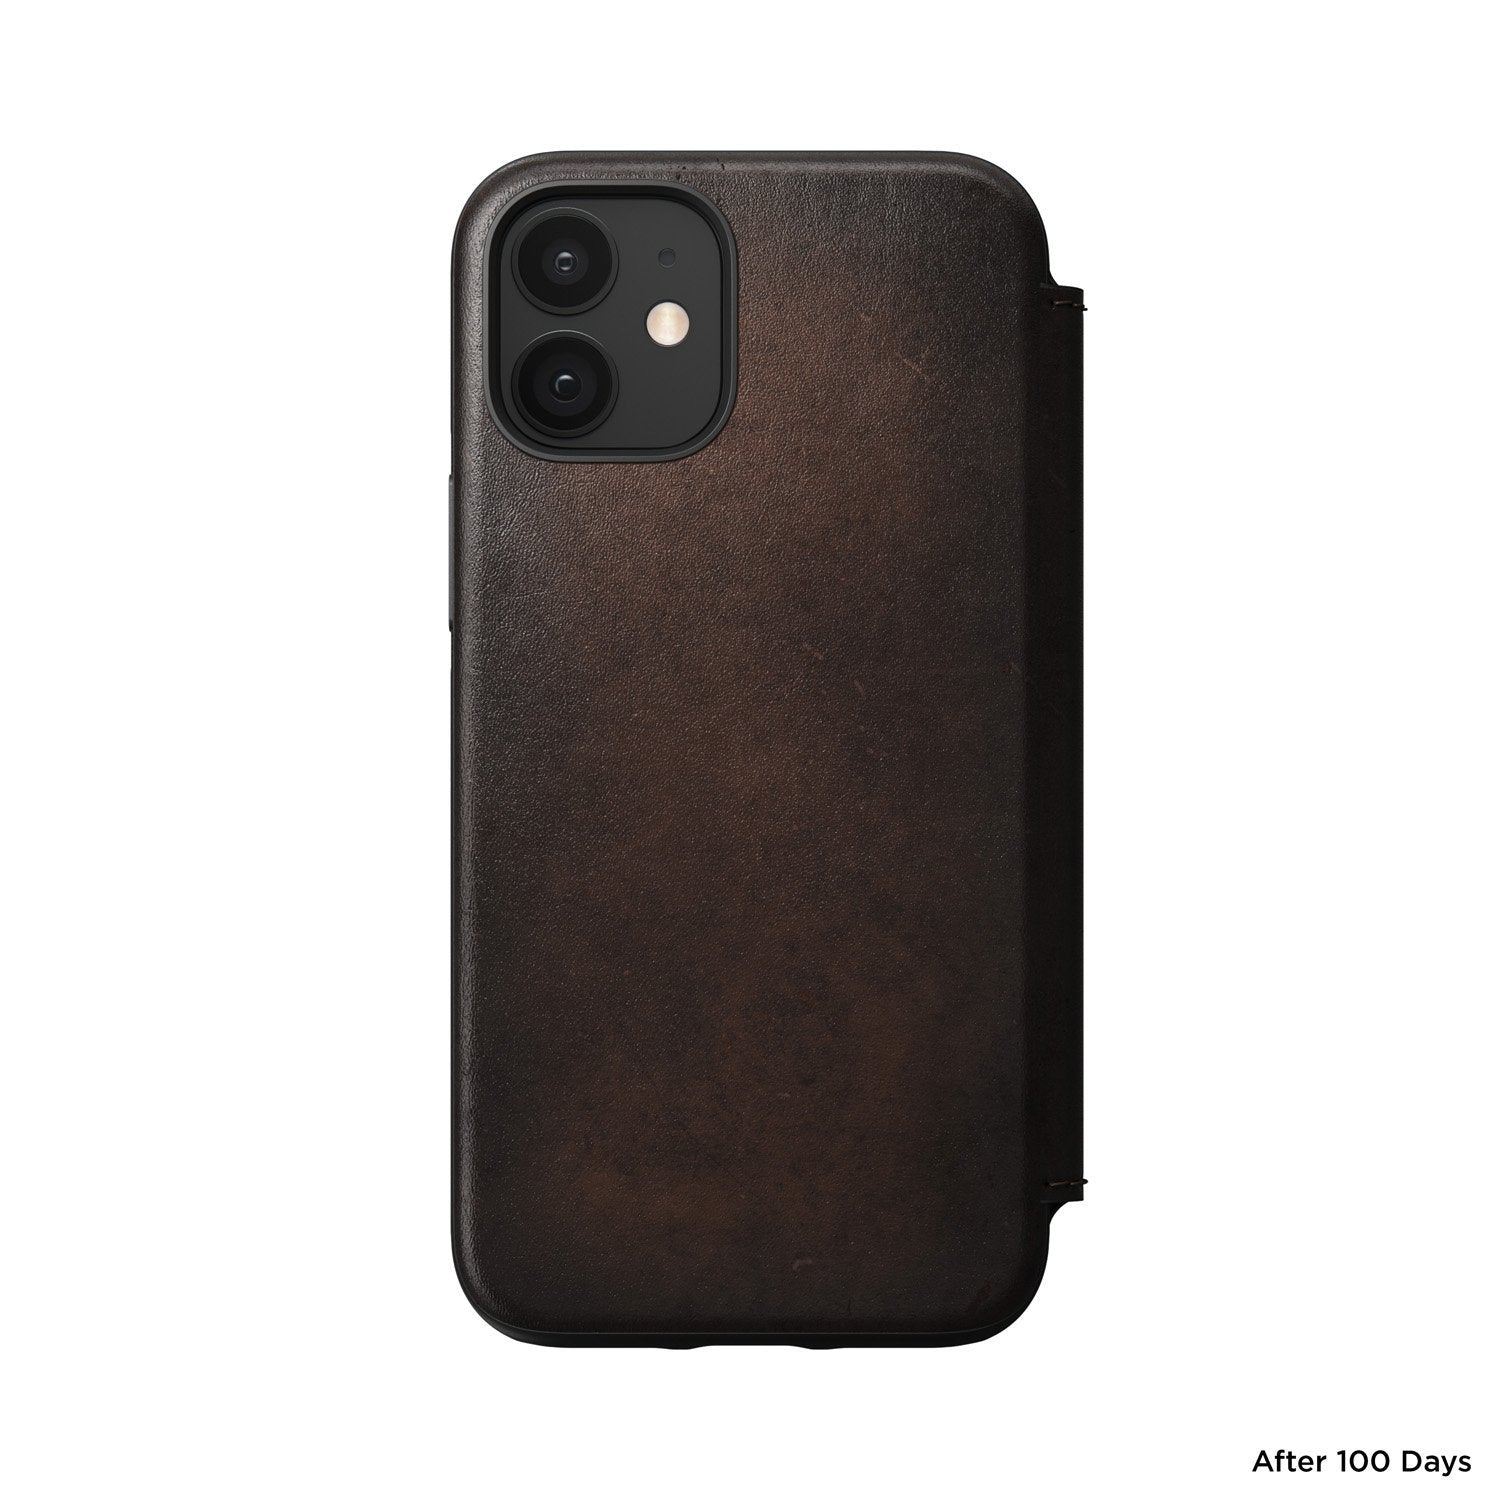 NOMAD Rugged Folio Horween Leather Case for iPhone 12 mini 5.4"(2020), Rustic Brown Default NOMAD 